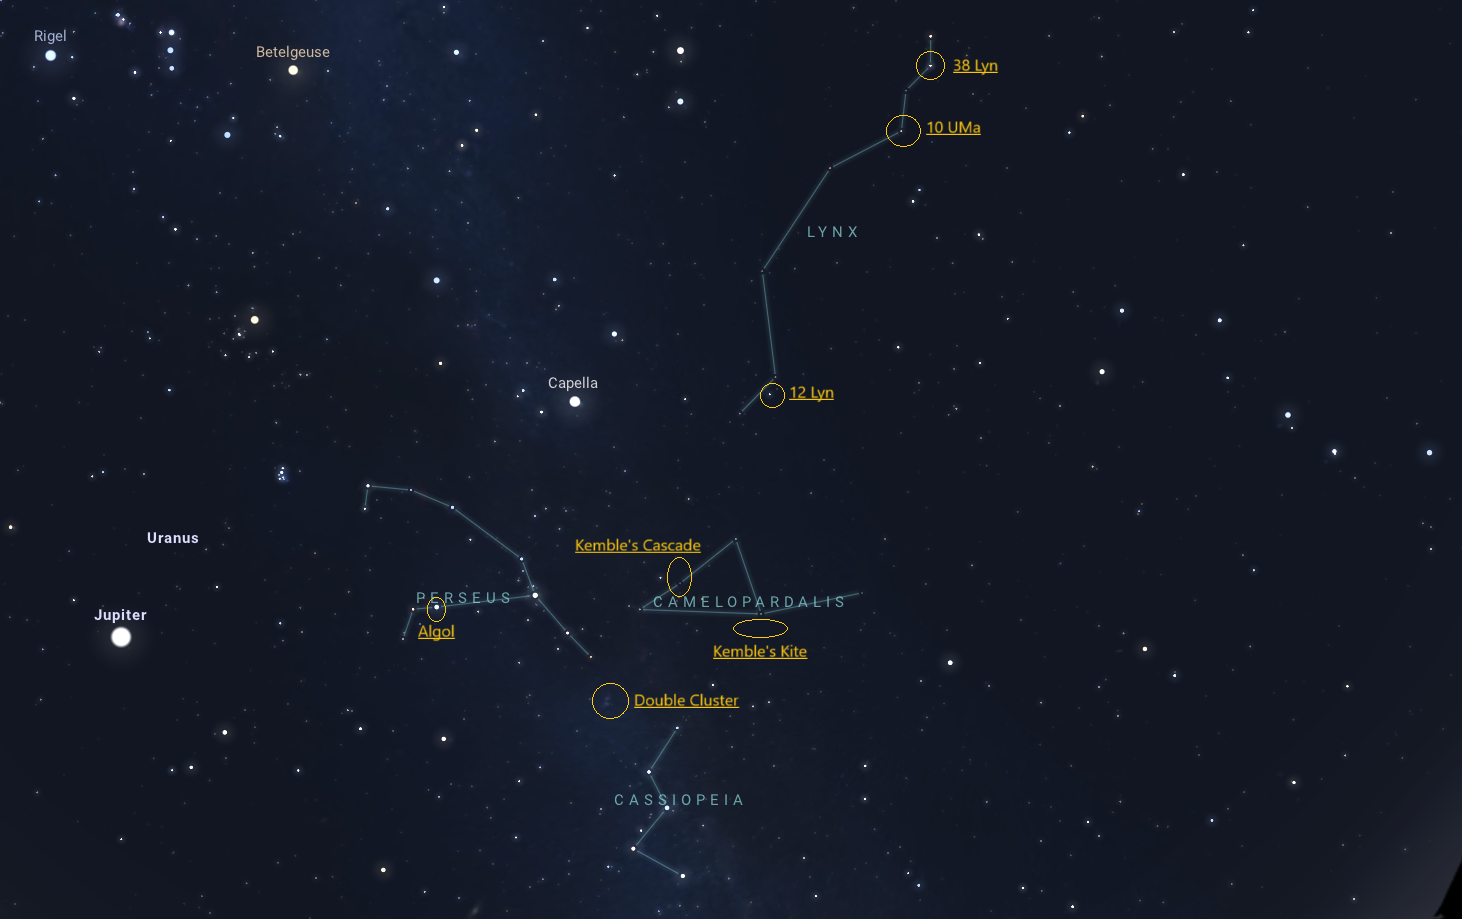 In the appearance of left to right: constellations Perseus, Camelopardalis, and Lynx in the night sky. Also featured: Cassiopeia as a guide constellation, and various stars.